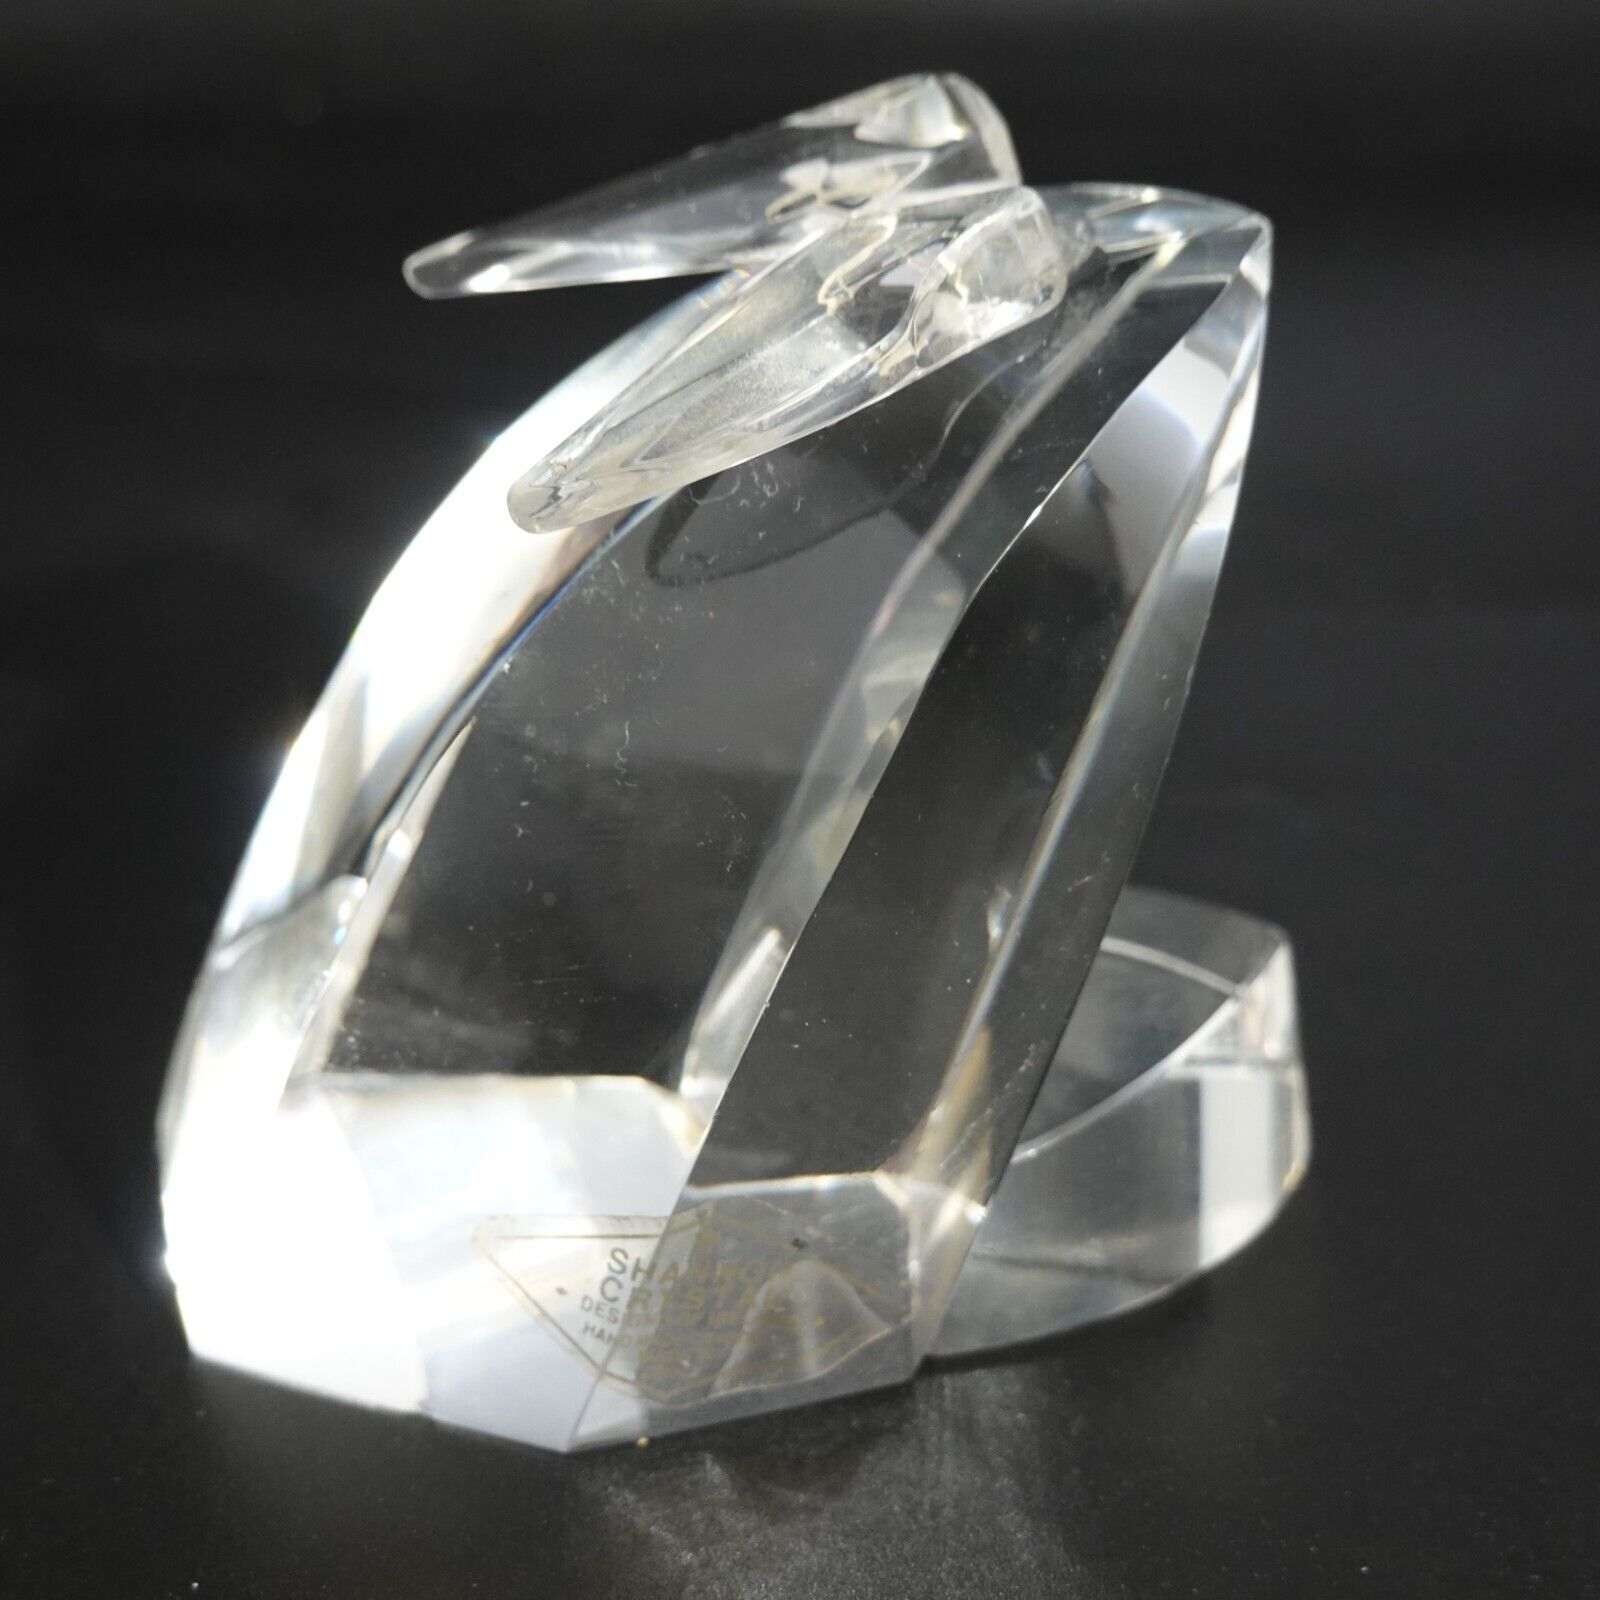 Shannon Crystal Designs Of Ireland Handmade Clear Decor Paperweight Sculpture